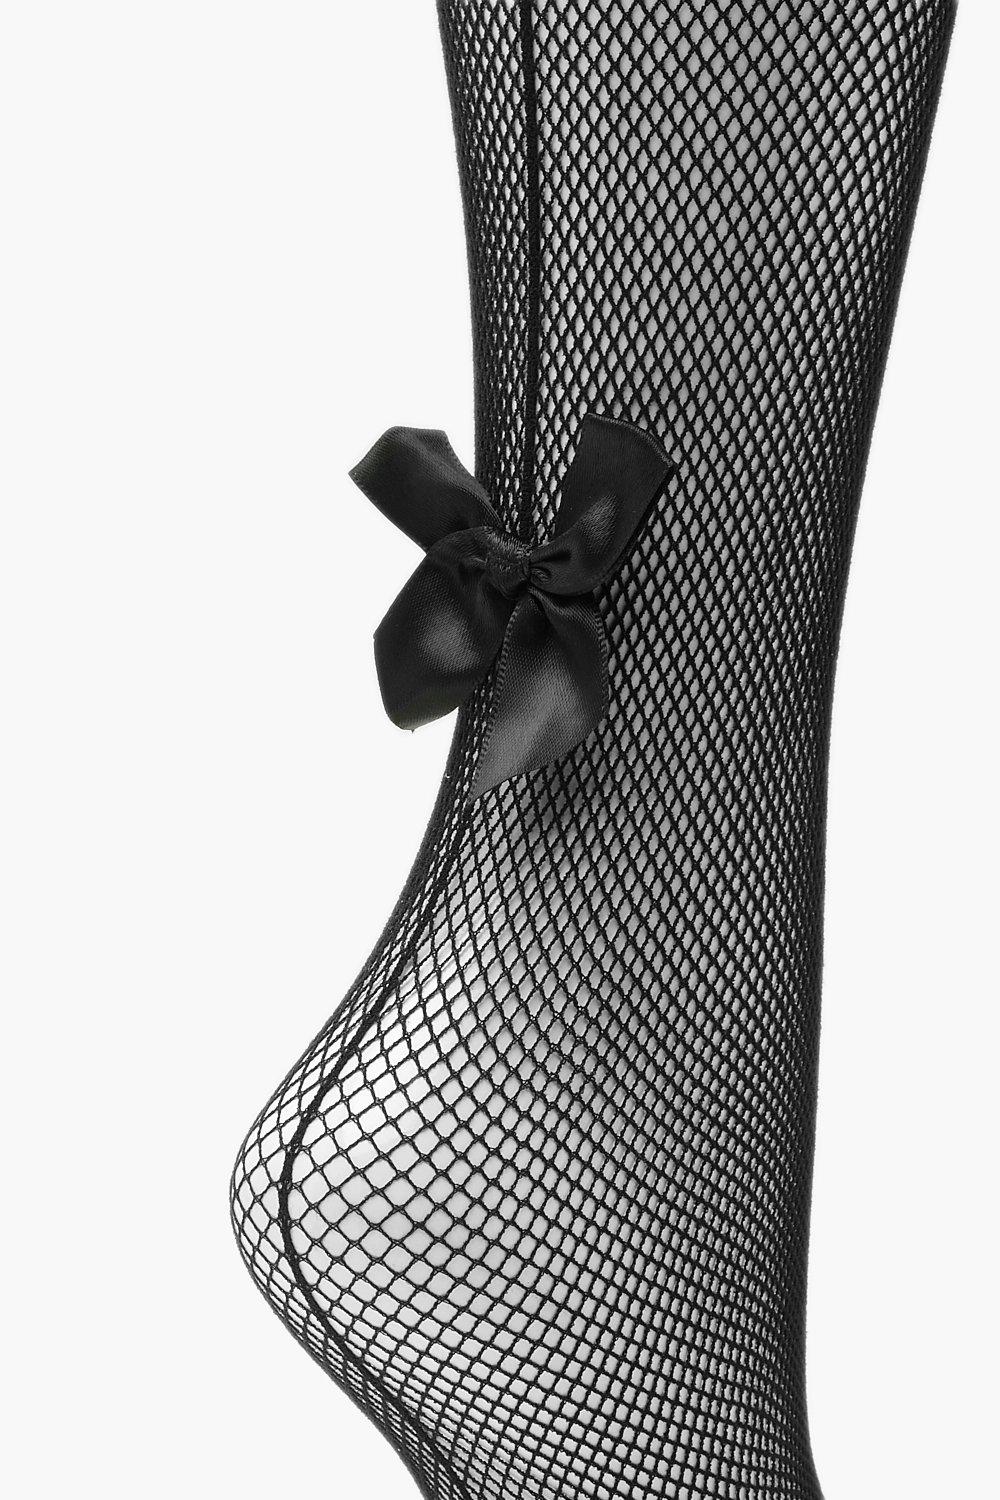 Plus Fishnet Stockings With Bows